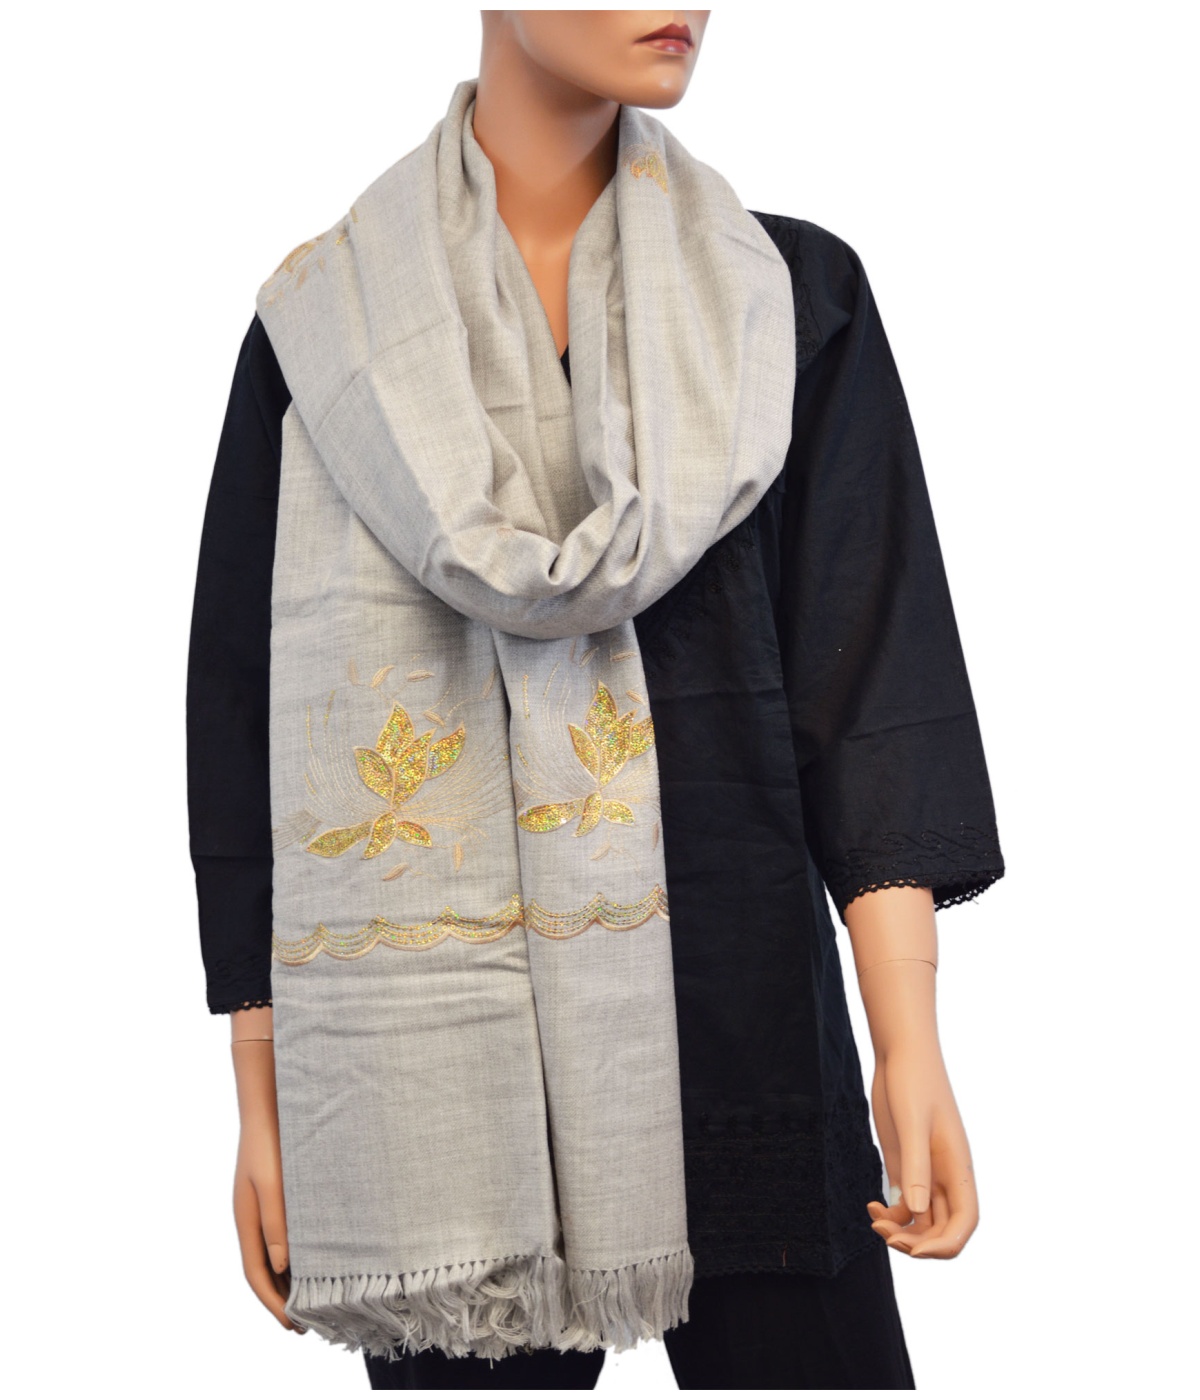  Embroidered Shawl Long Scarf